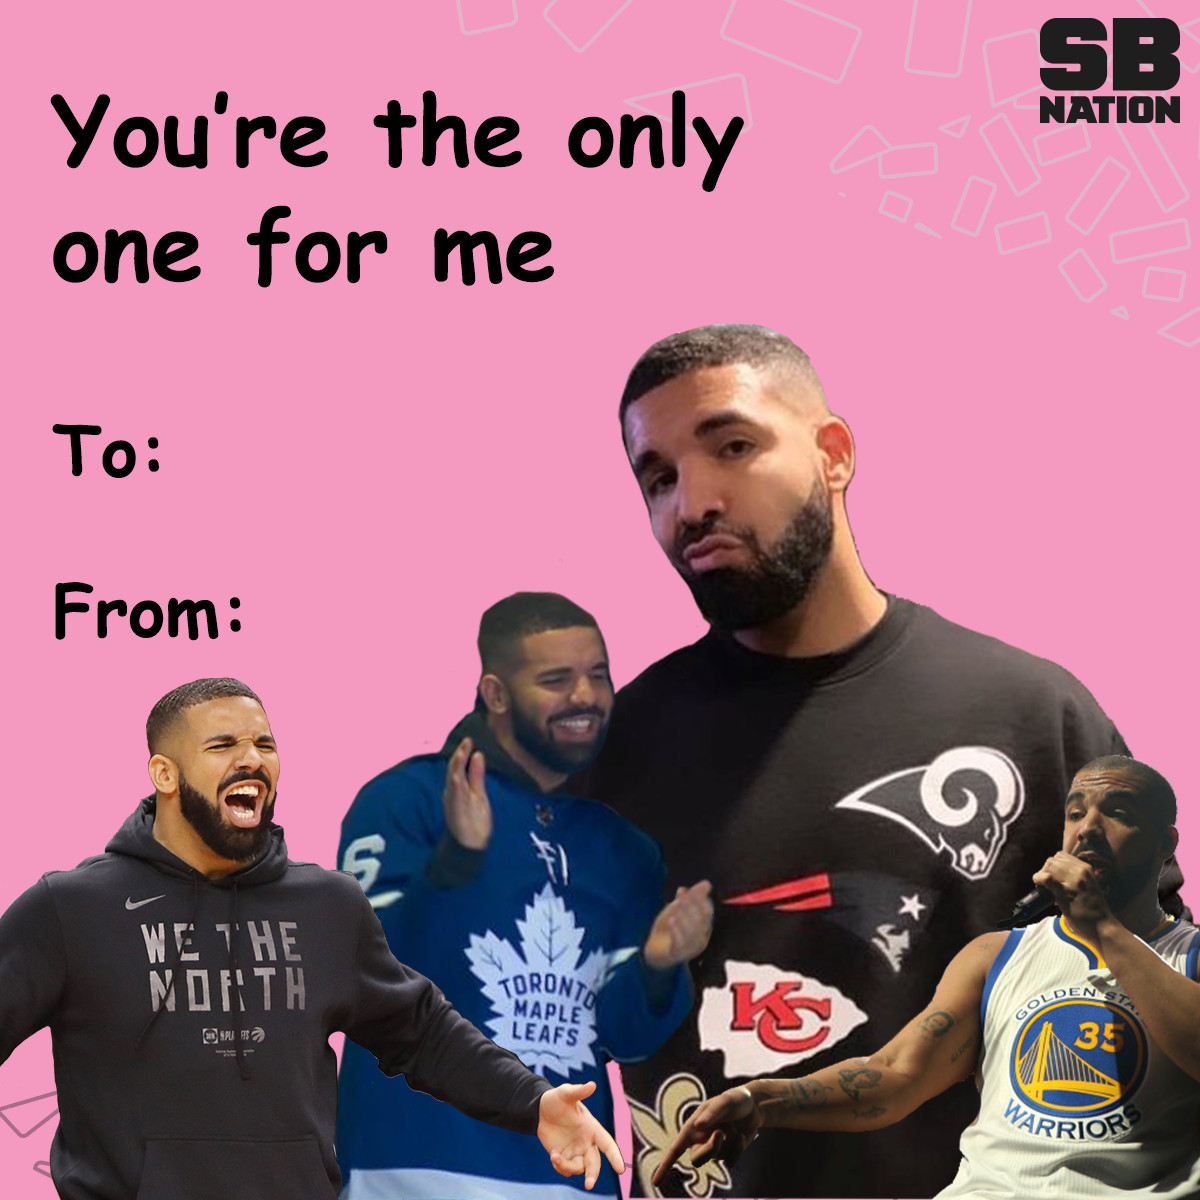 Several images of Drake in different sports team jerseys with the text “You’re the only one for me”